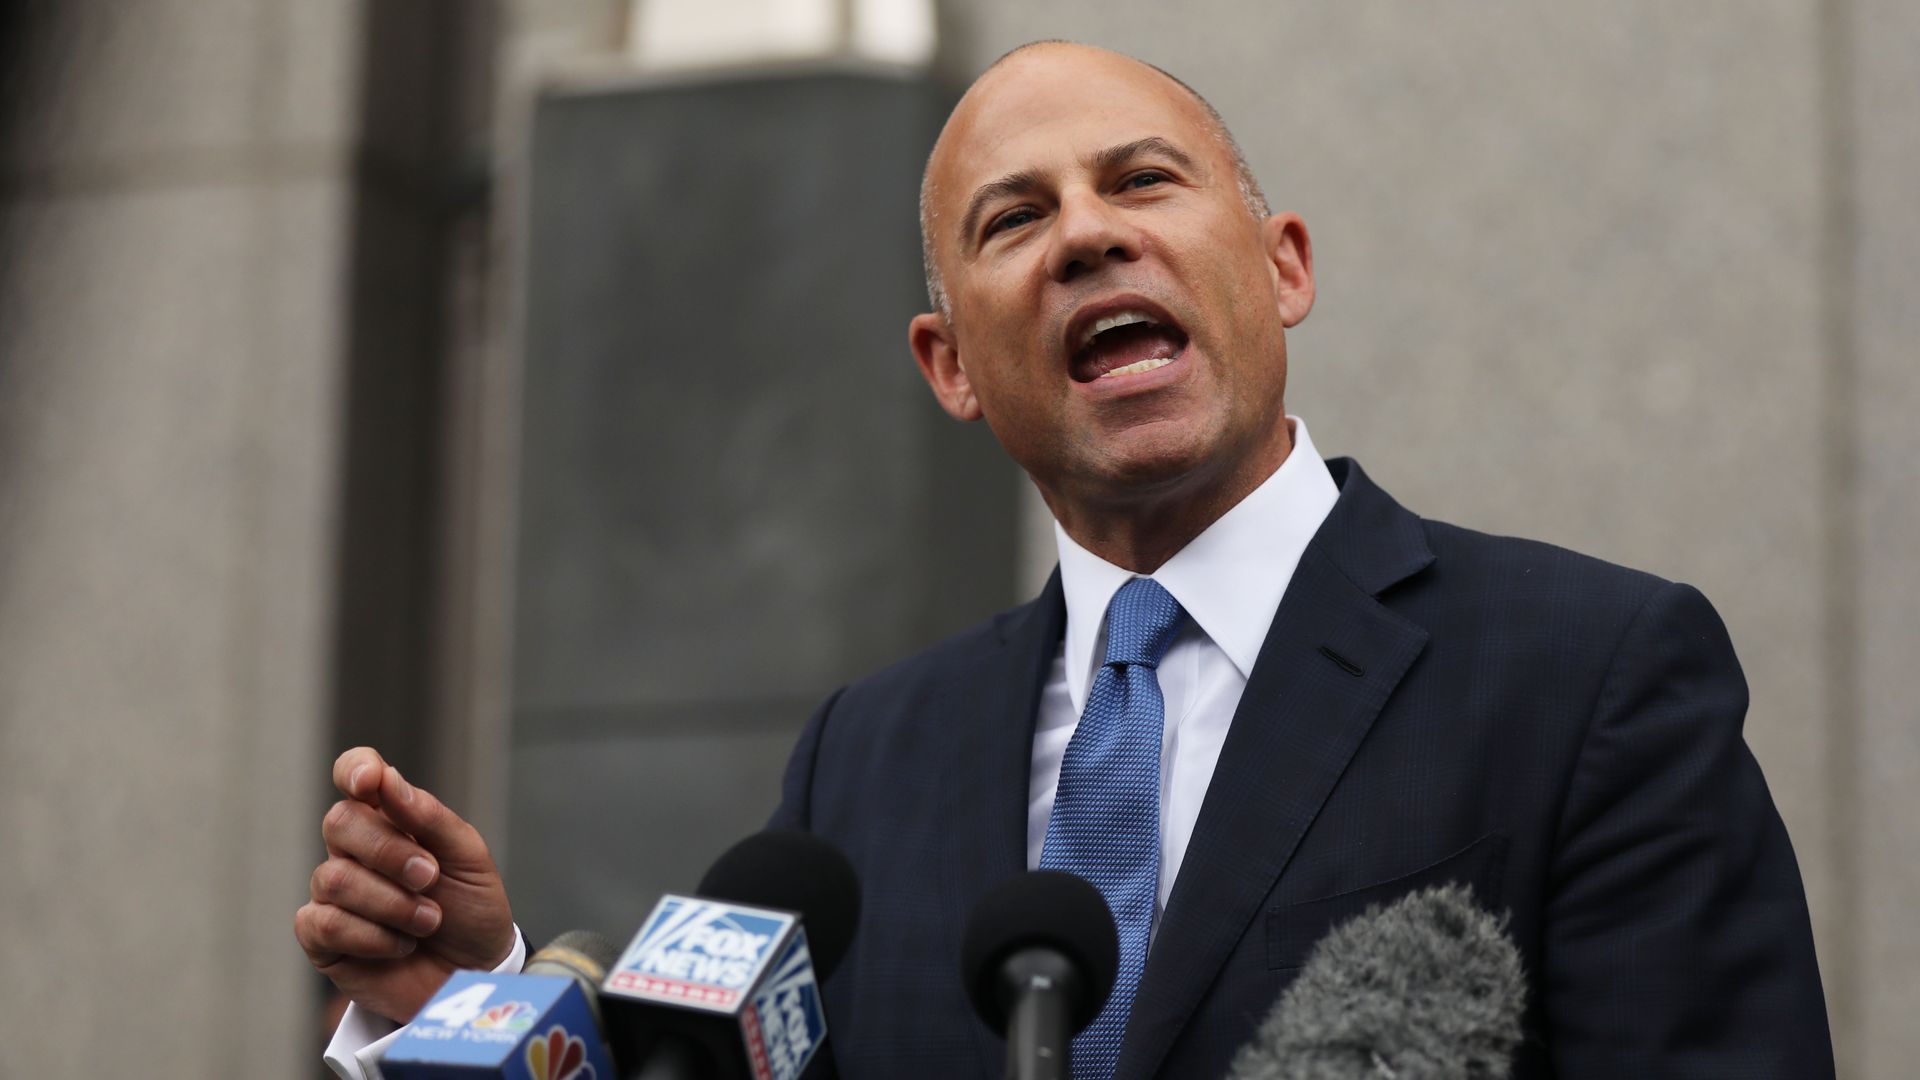 Attorney Michael Avenatti speaks to the media outside of a New York court house after a hearing